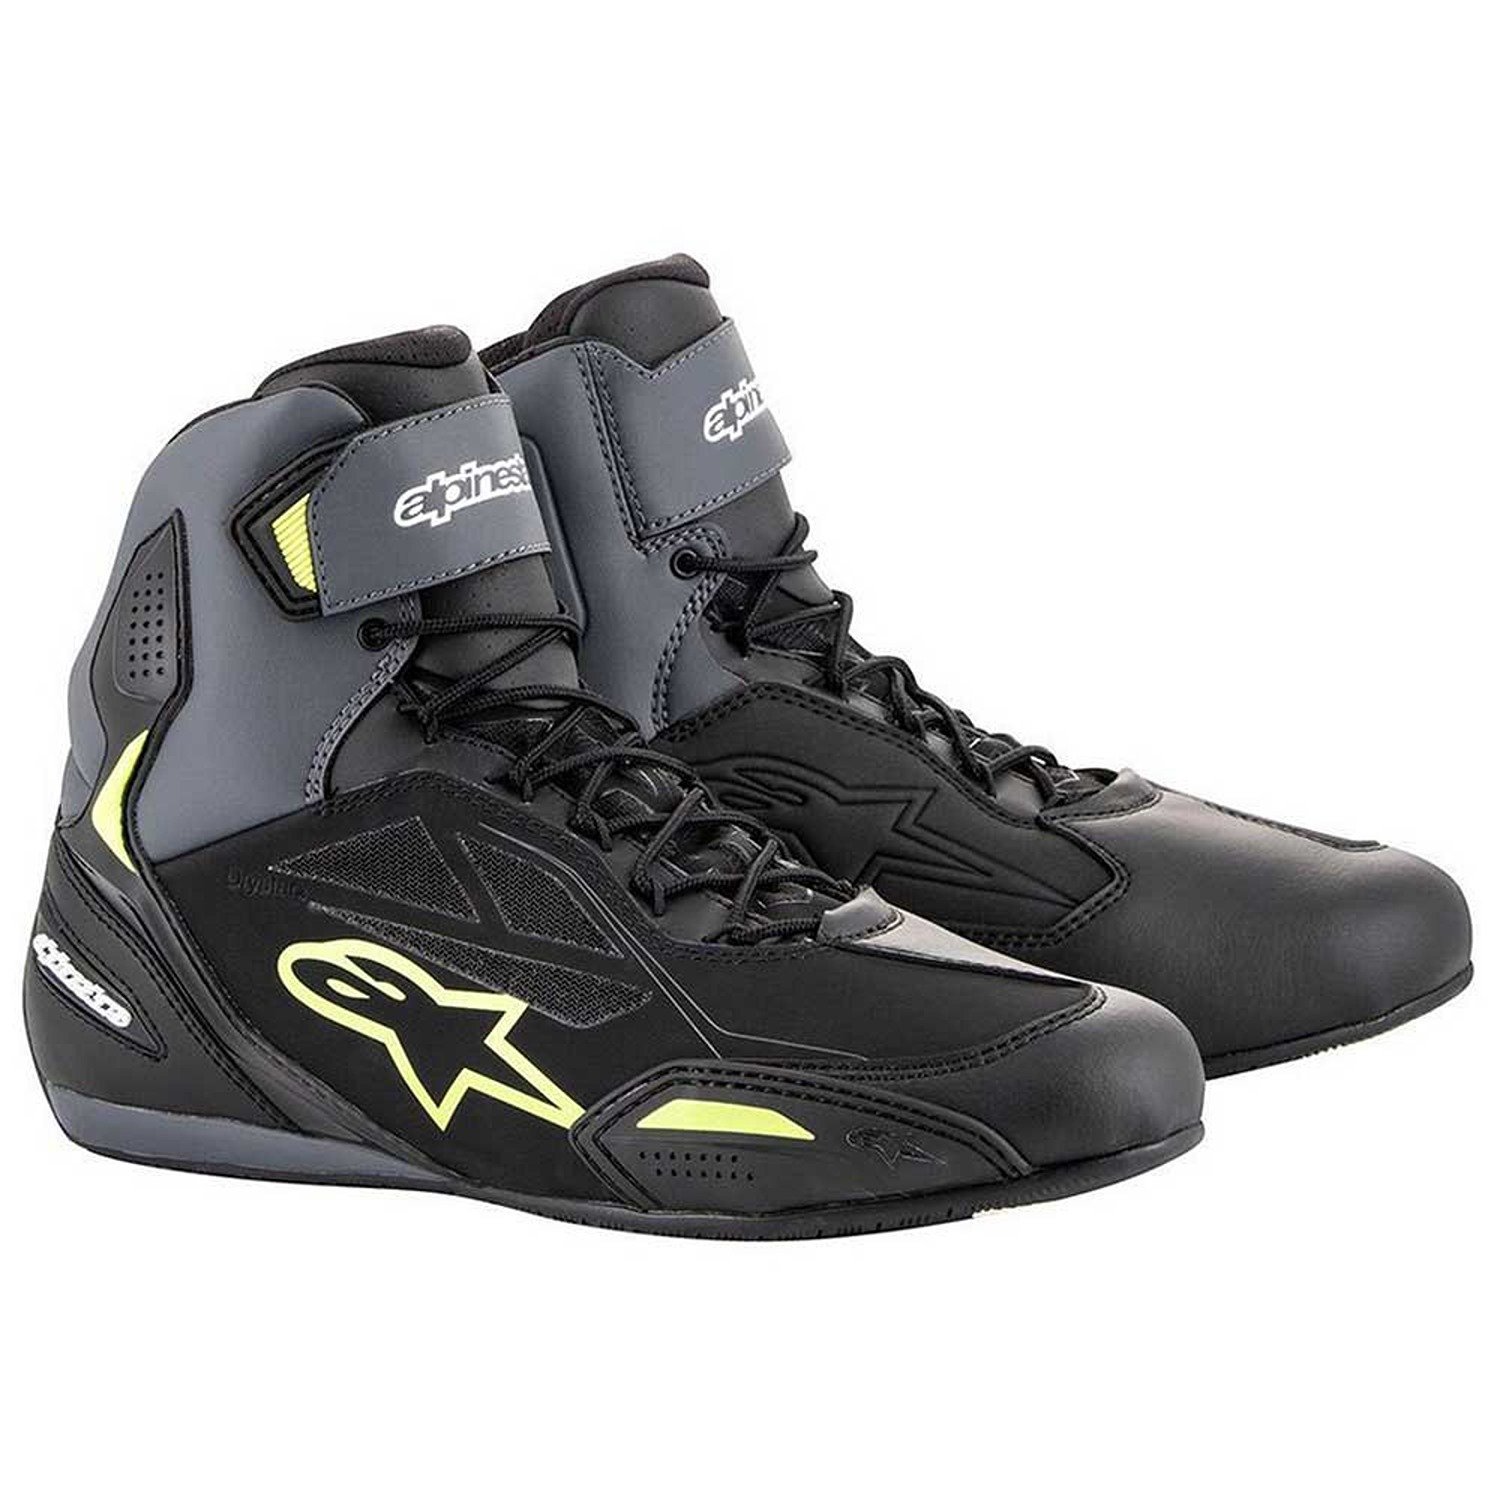 Image of Alpinestars Faster-3 Shoes Black Yellow Fluo Size US 75 EN